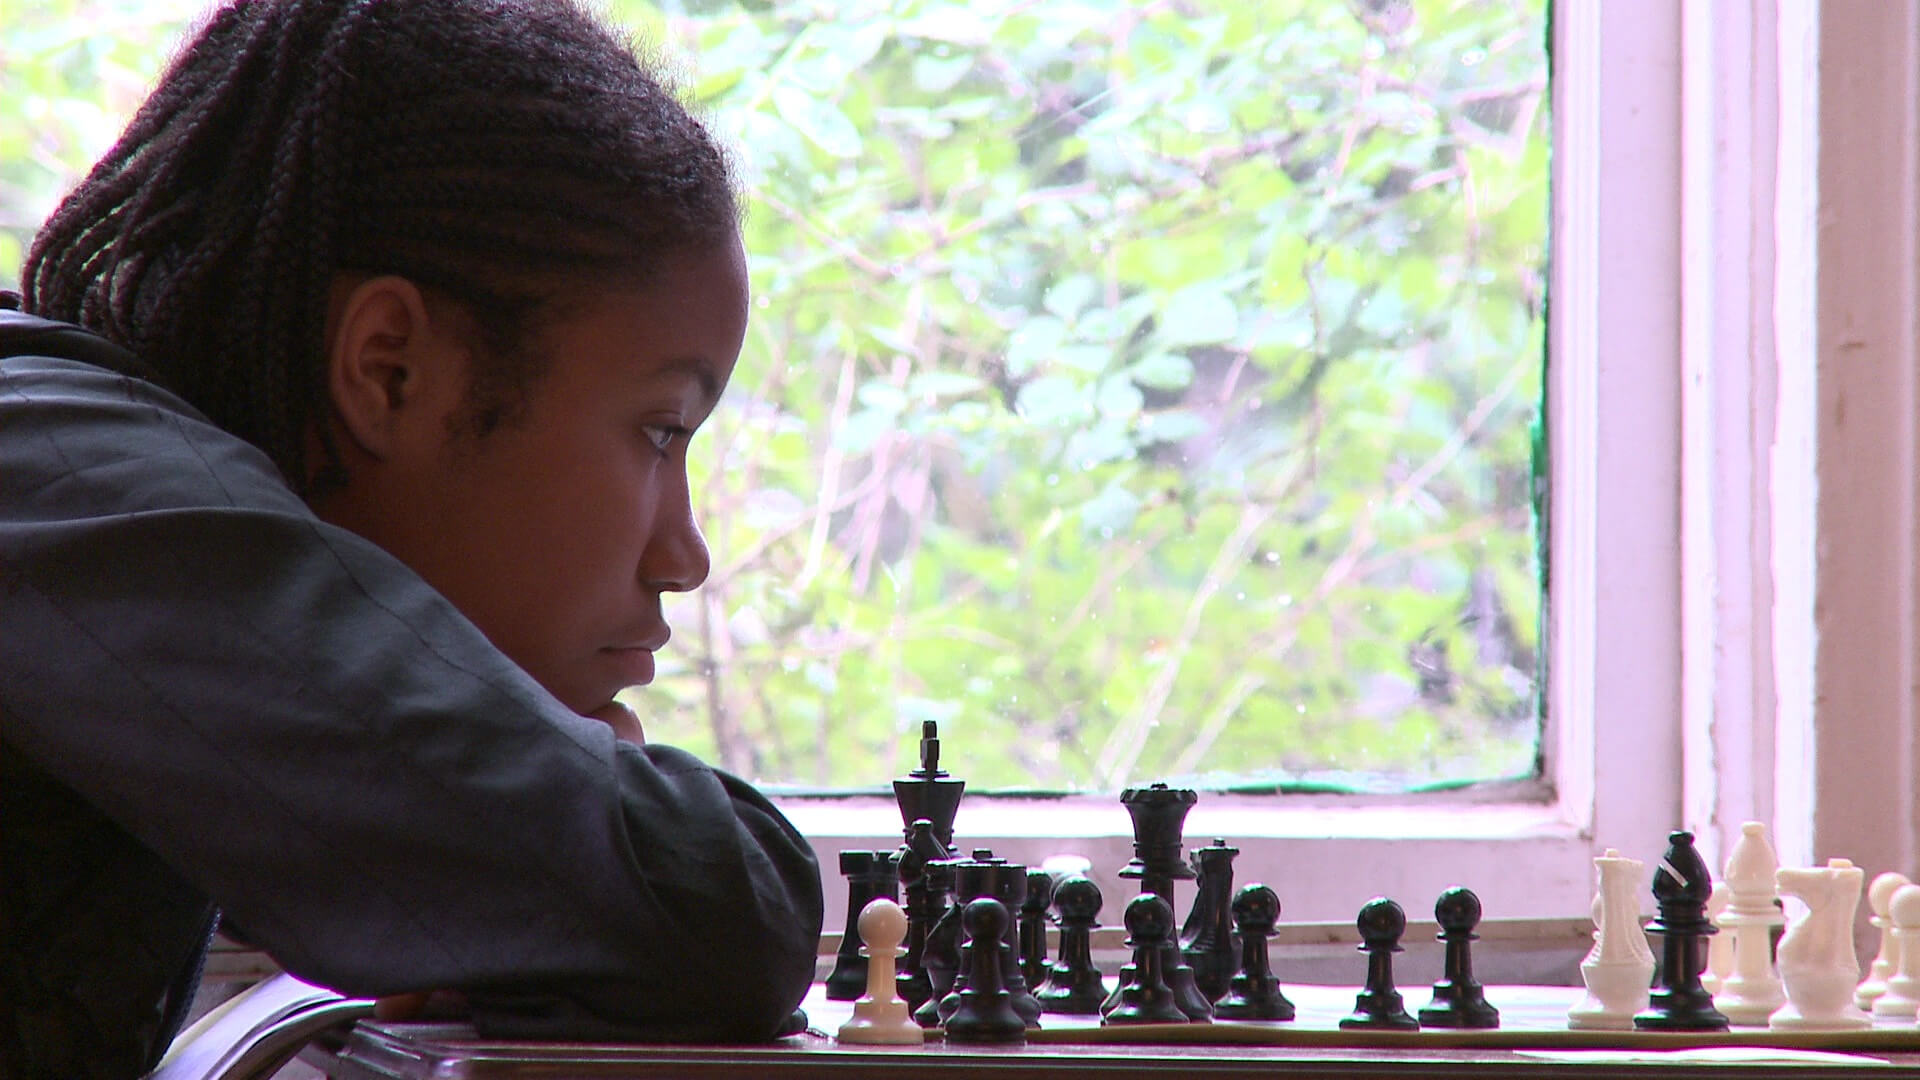 A teenager is reclining her head on her shoulder, while she watches a chess board.